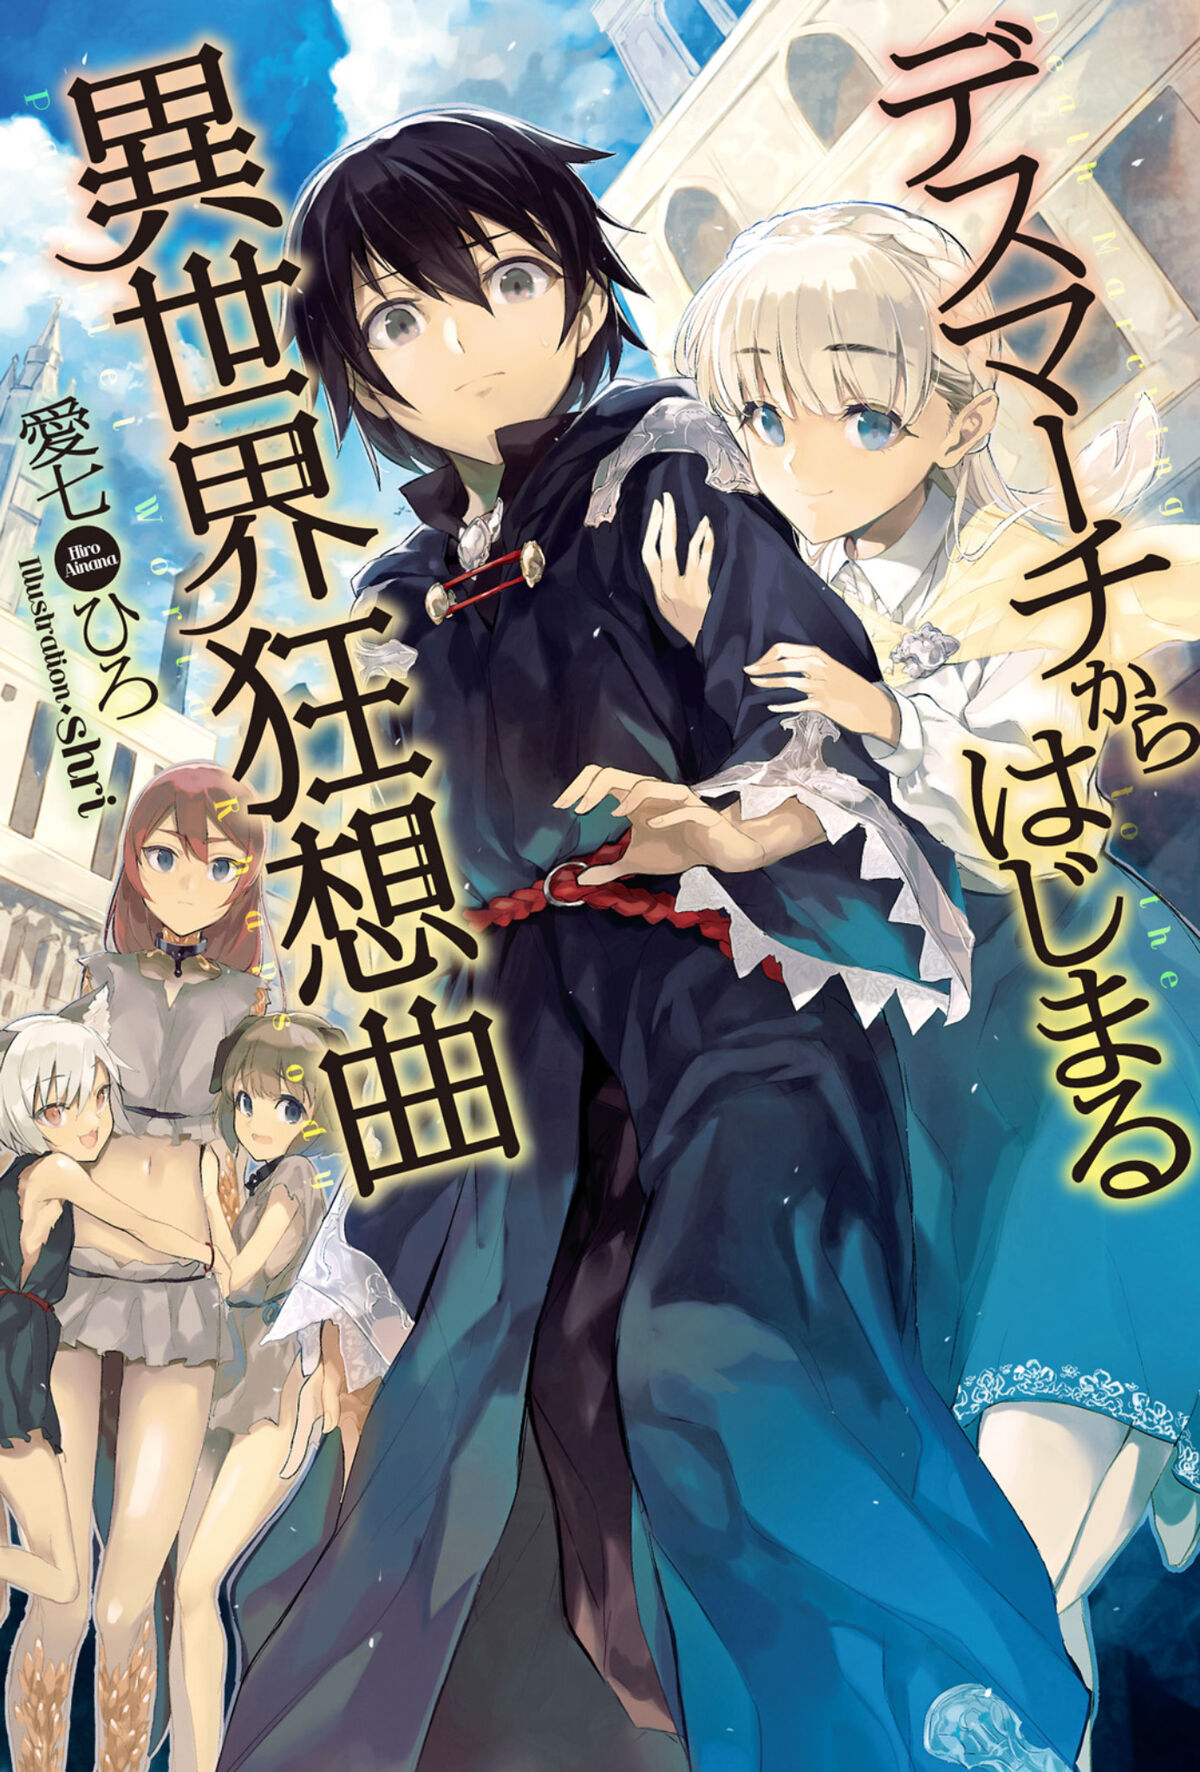 Death March to the Parallel World Rhapsody, Vol. 5 (Manga)